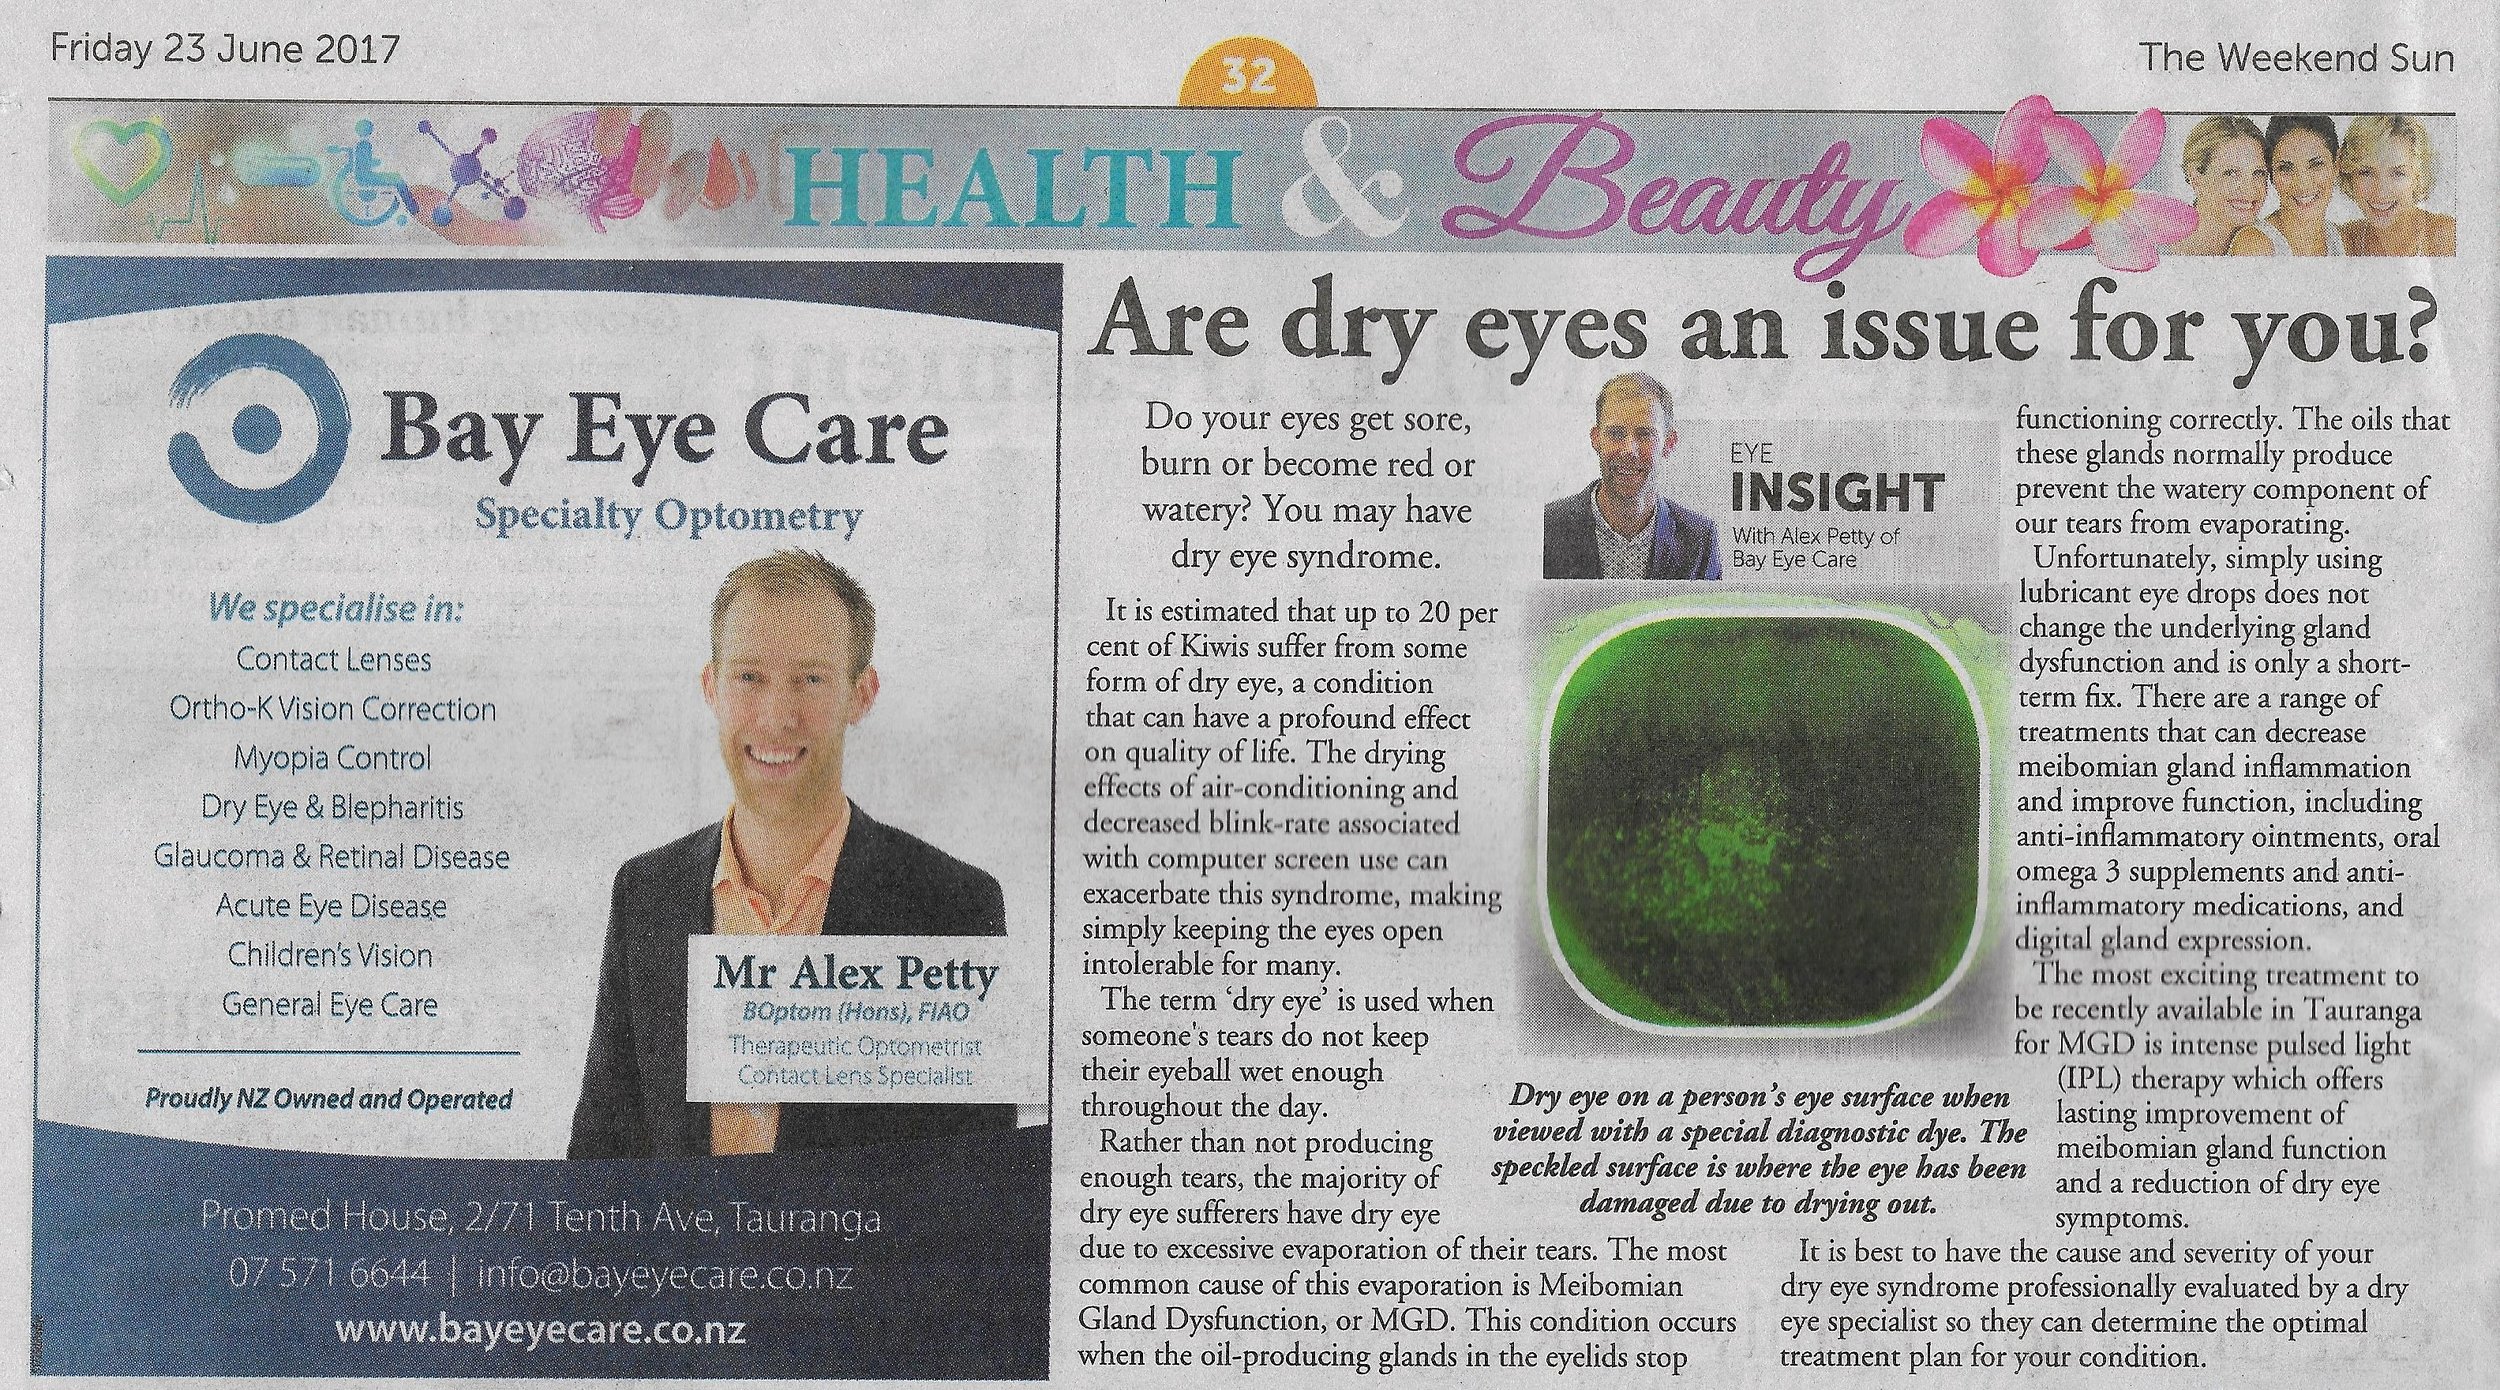 Dry Eye Treatments are discussed in the Weekend Sun June 2017